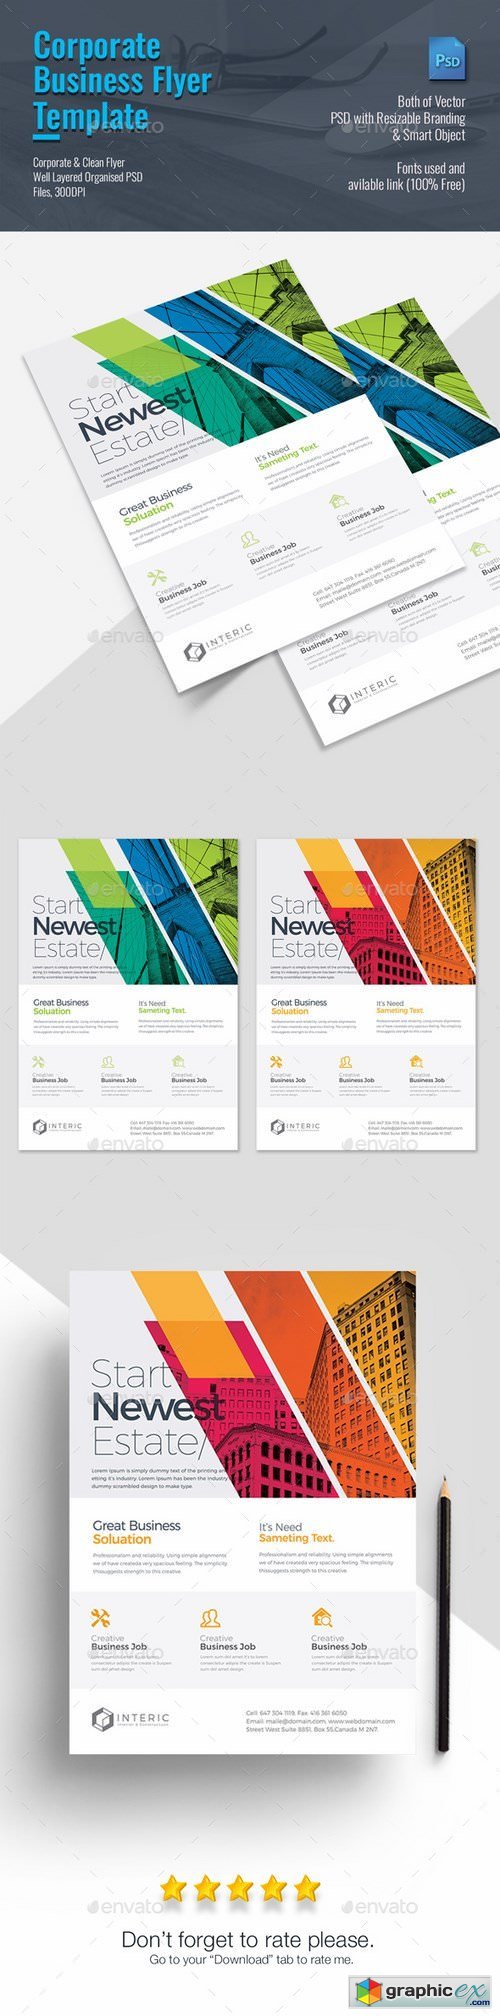 Corporate Business Flyer 21074490